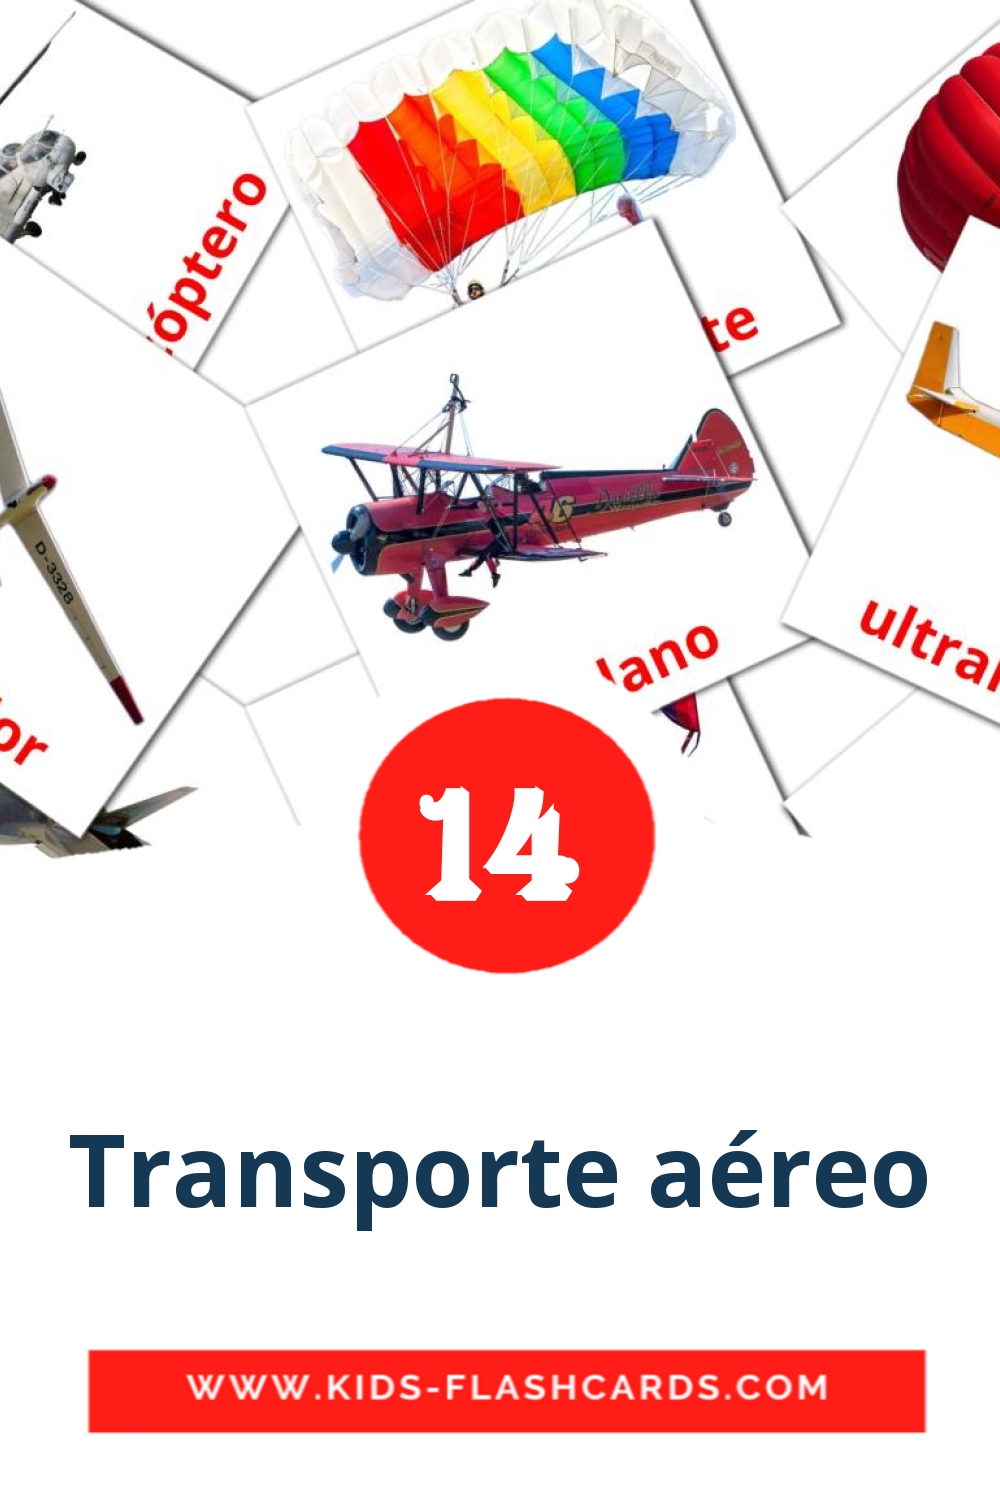 14 Aeronave Picture Cards for Kindergarden in spanish